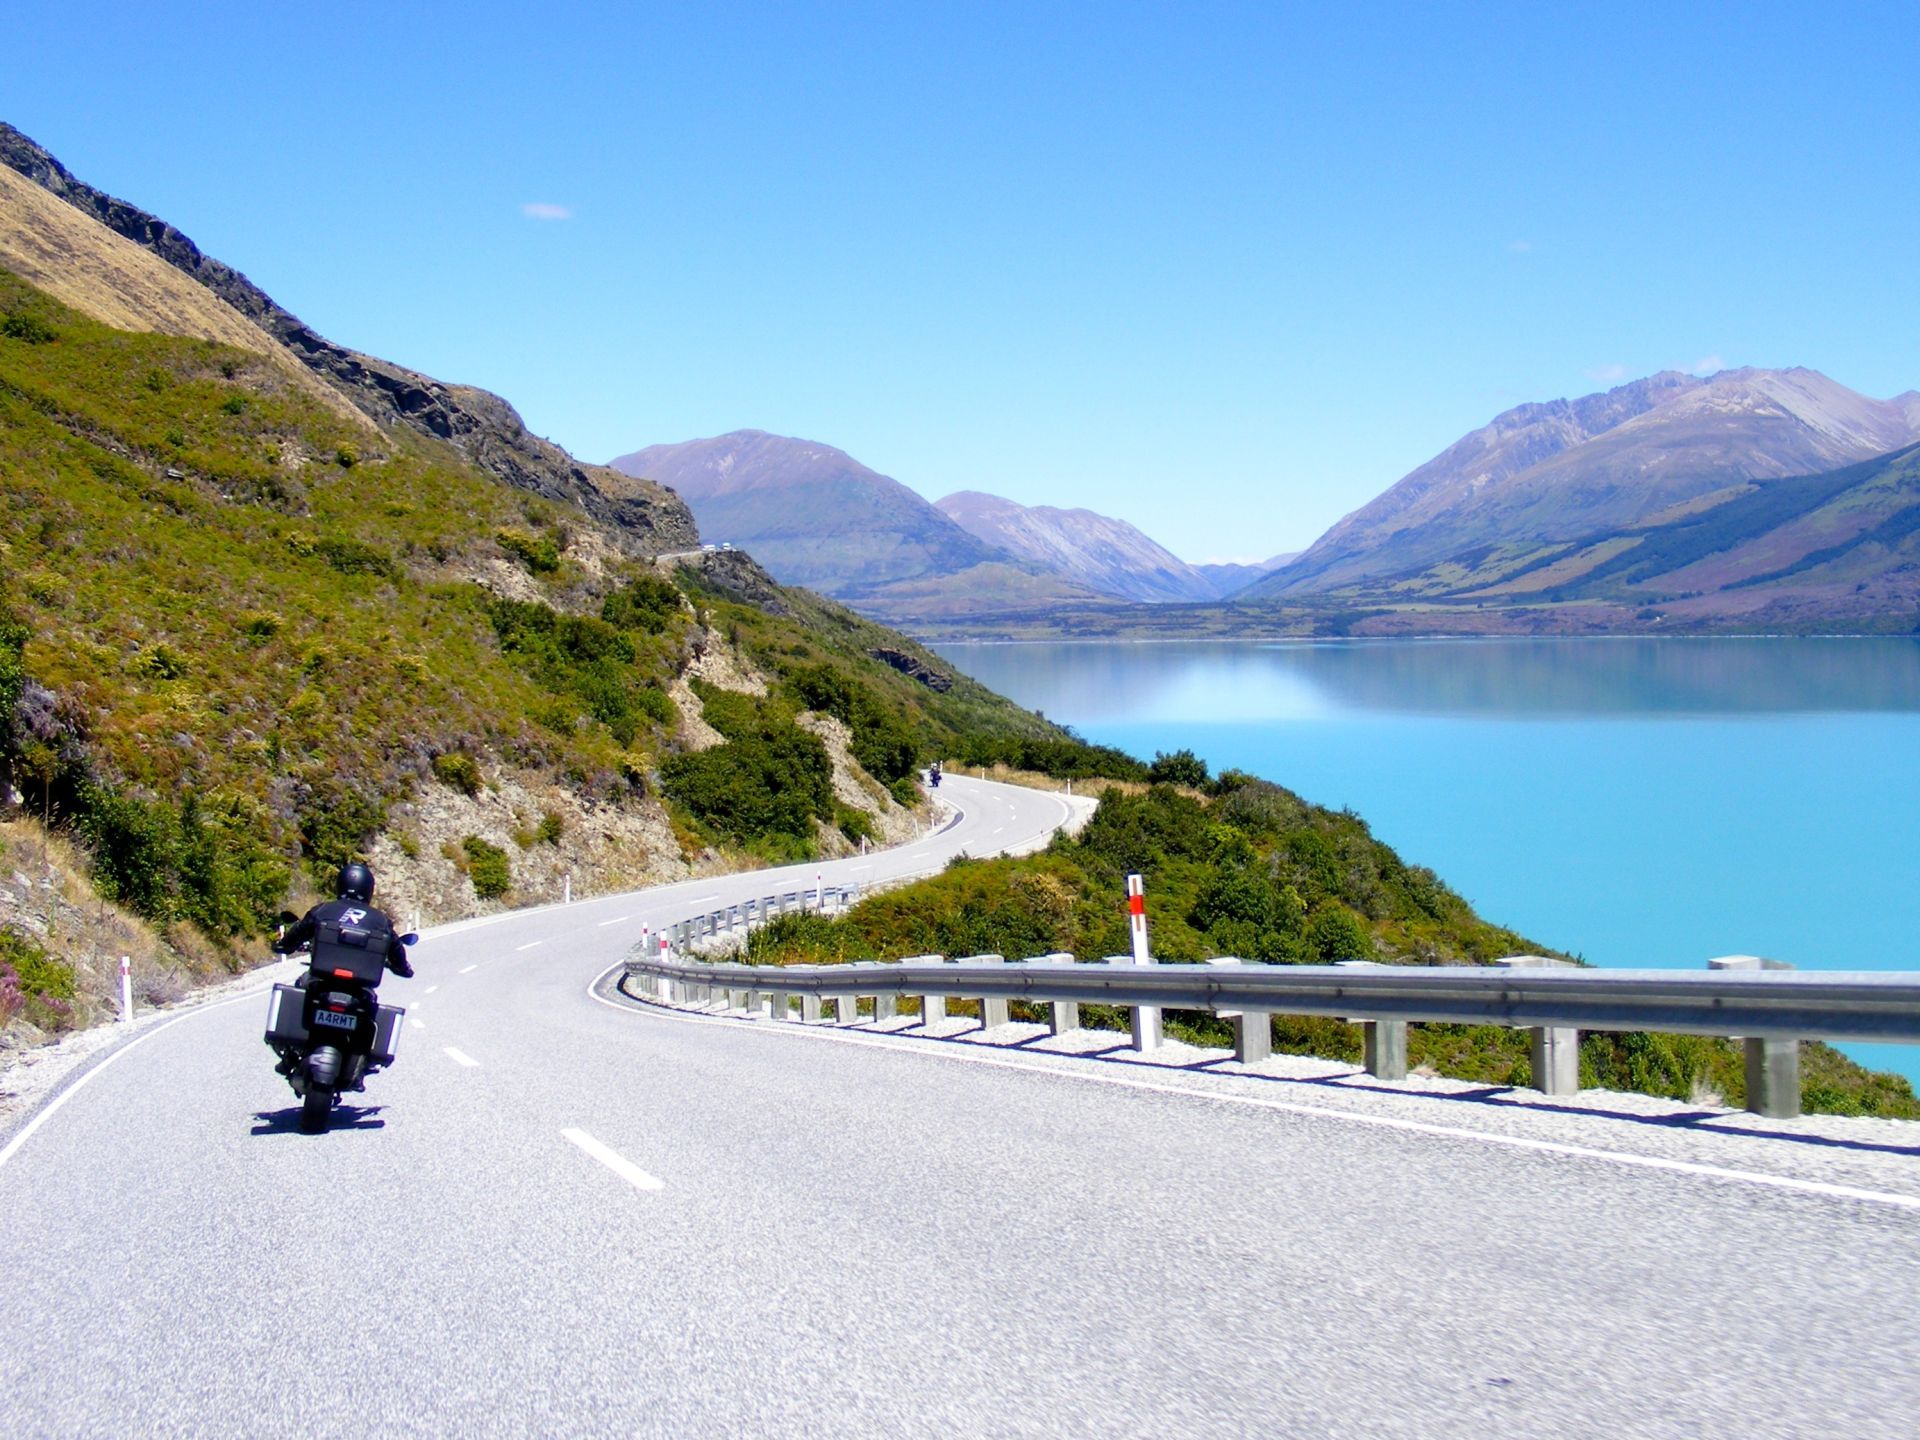 Motorcycle Tours | Book your dream motorcycle tour of New Zealand